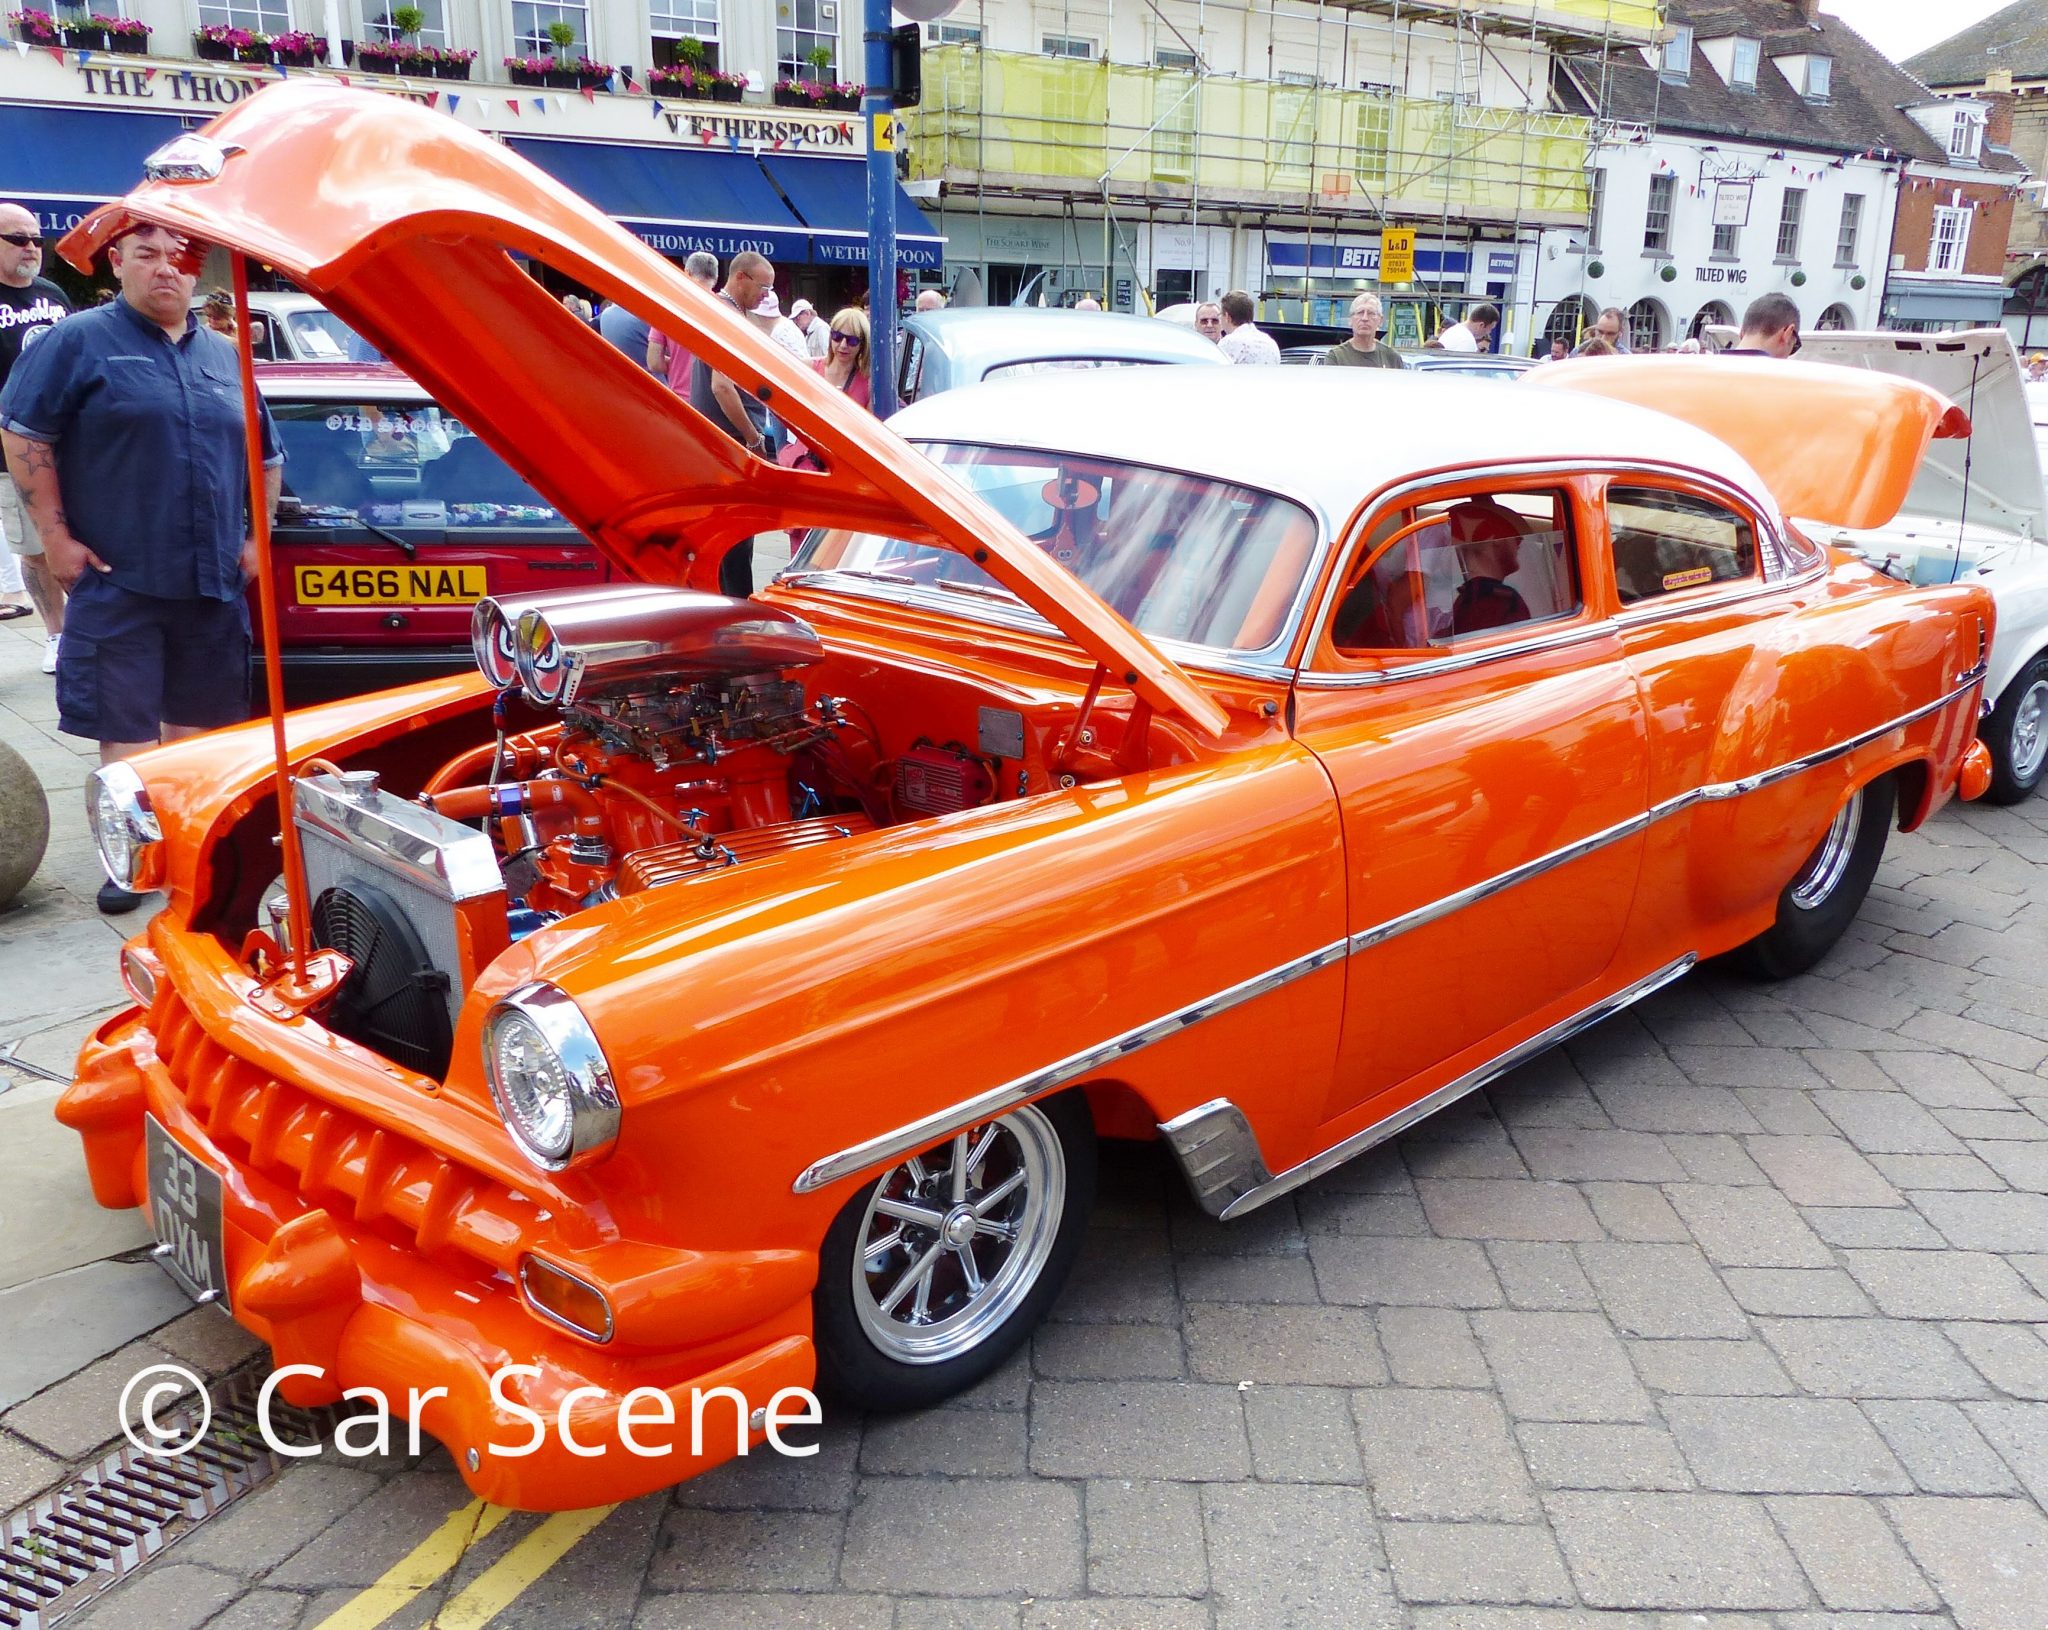 Heavily customised 1950s Chevrolet Coupe front side view